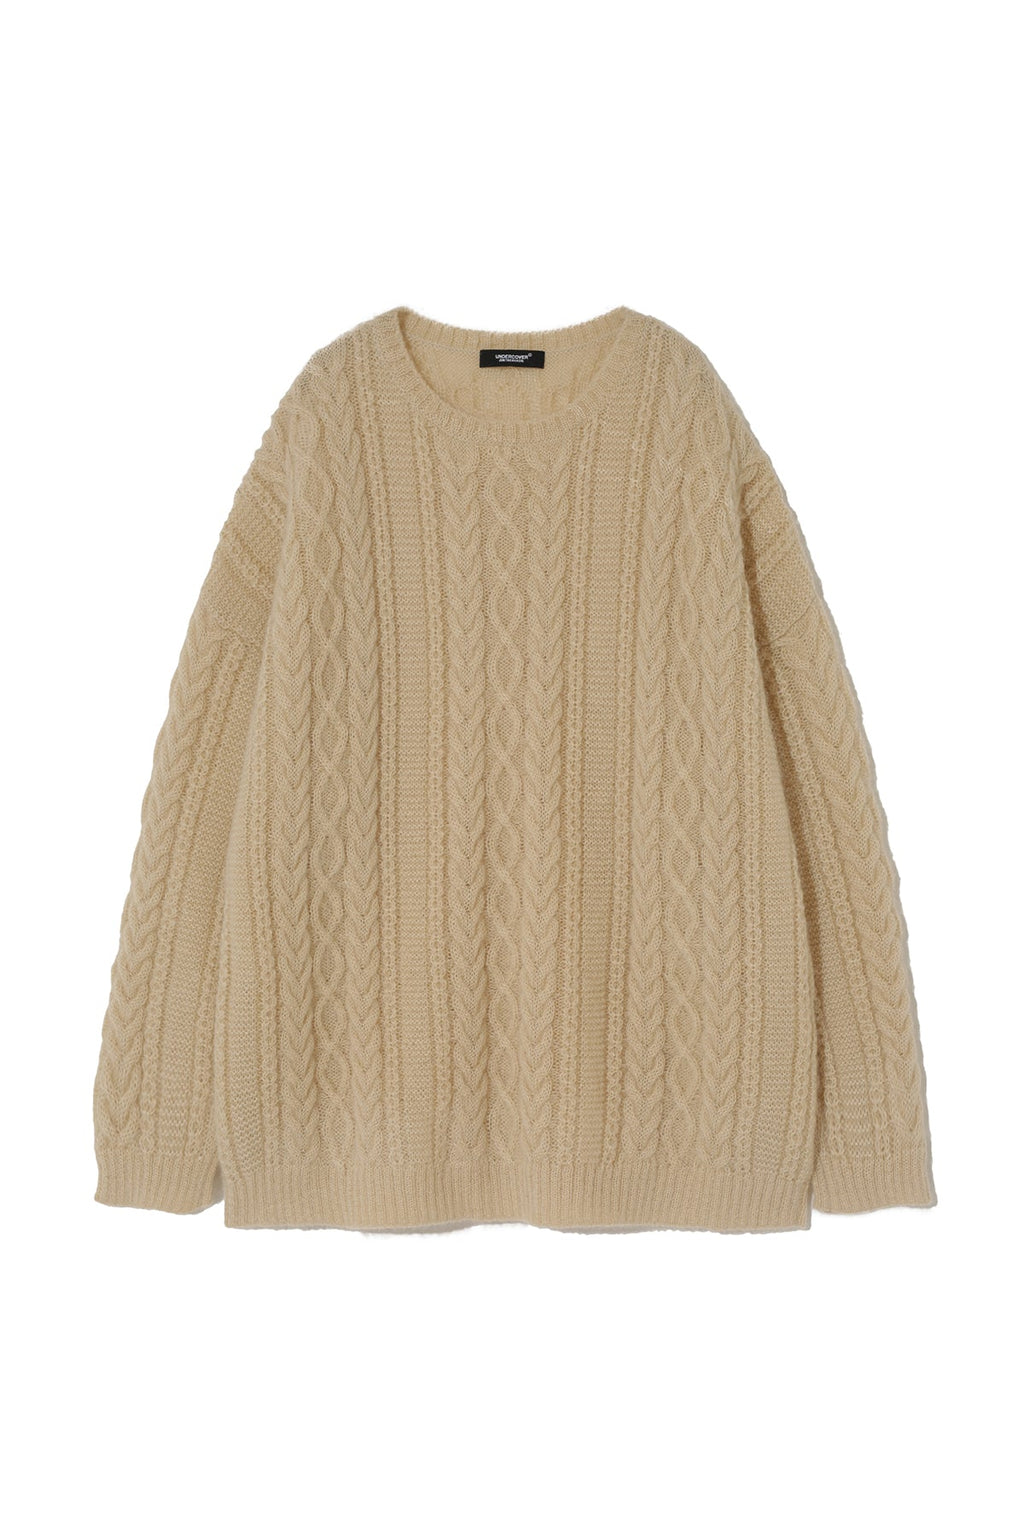 The Cable Knit Sweater in Beige – Frank And Oak Canada